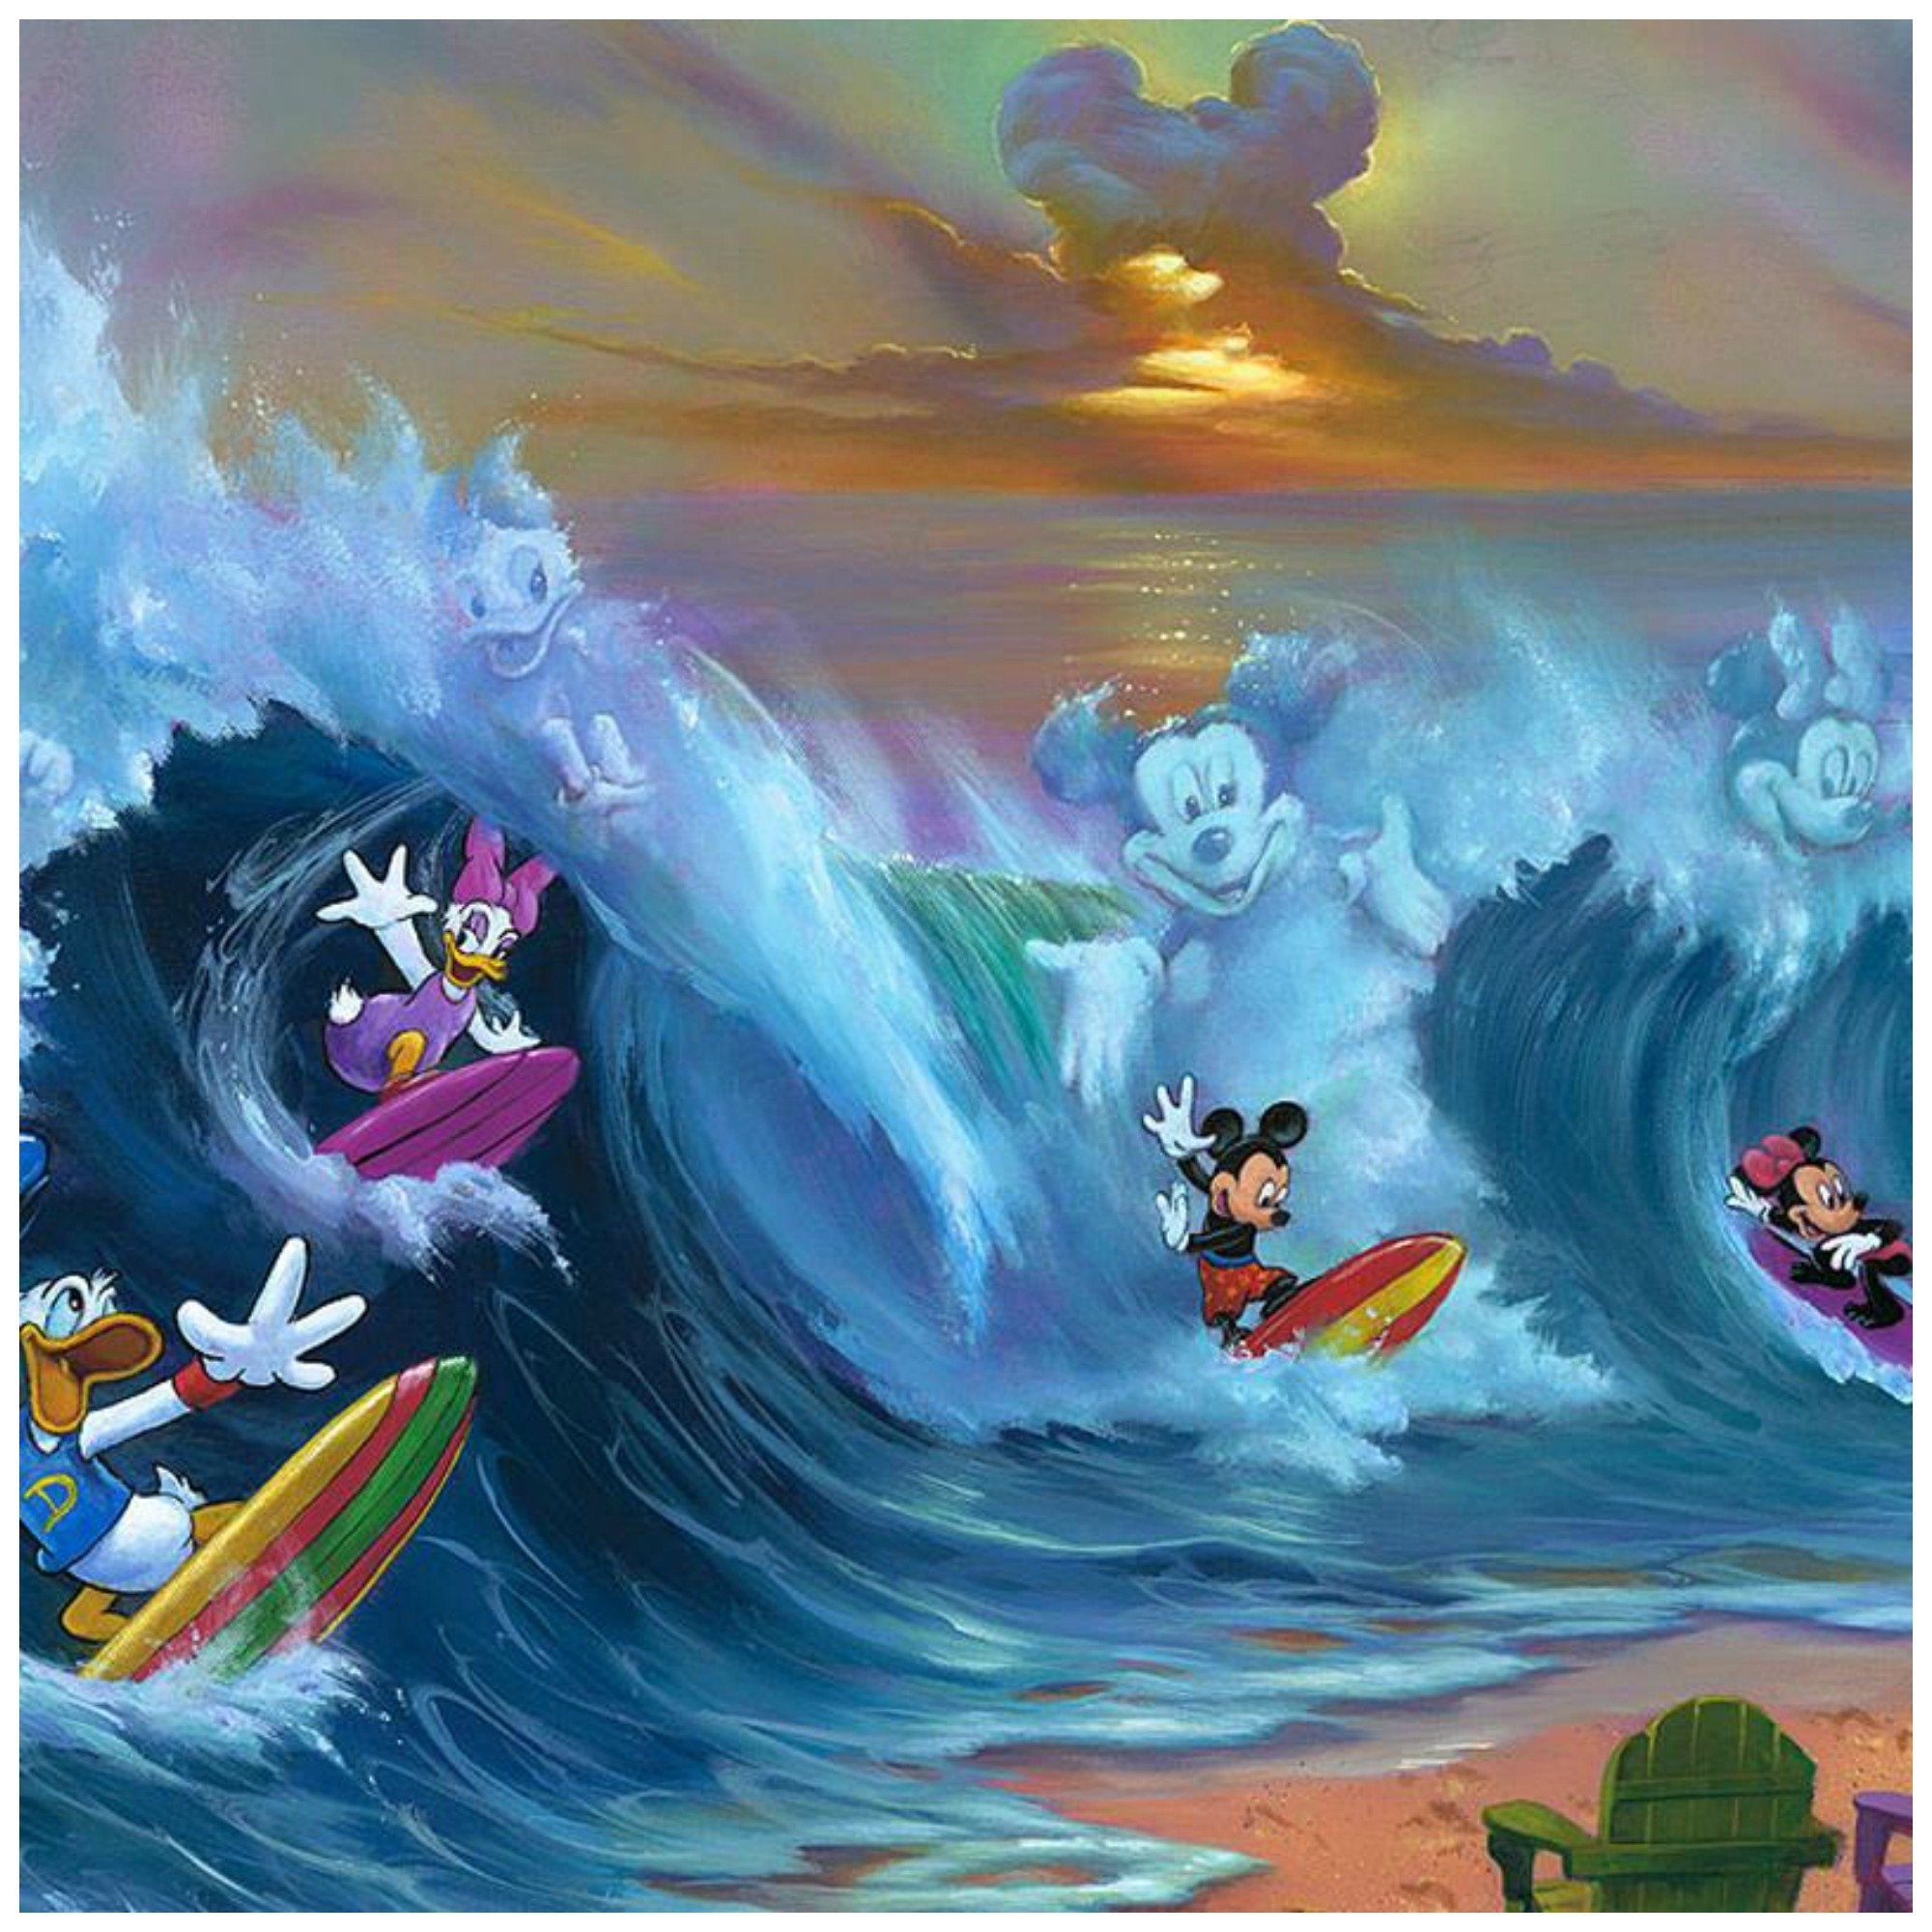 Surfing with Friends by Jim Warren  Mickey, Minnie, Donald, and Daisy having fun surfing, you can also see images of them formed in the waves, the sunset clouds are in the form of Mickey's head - closeup